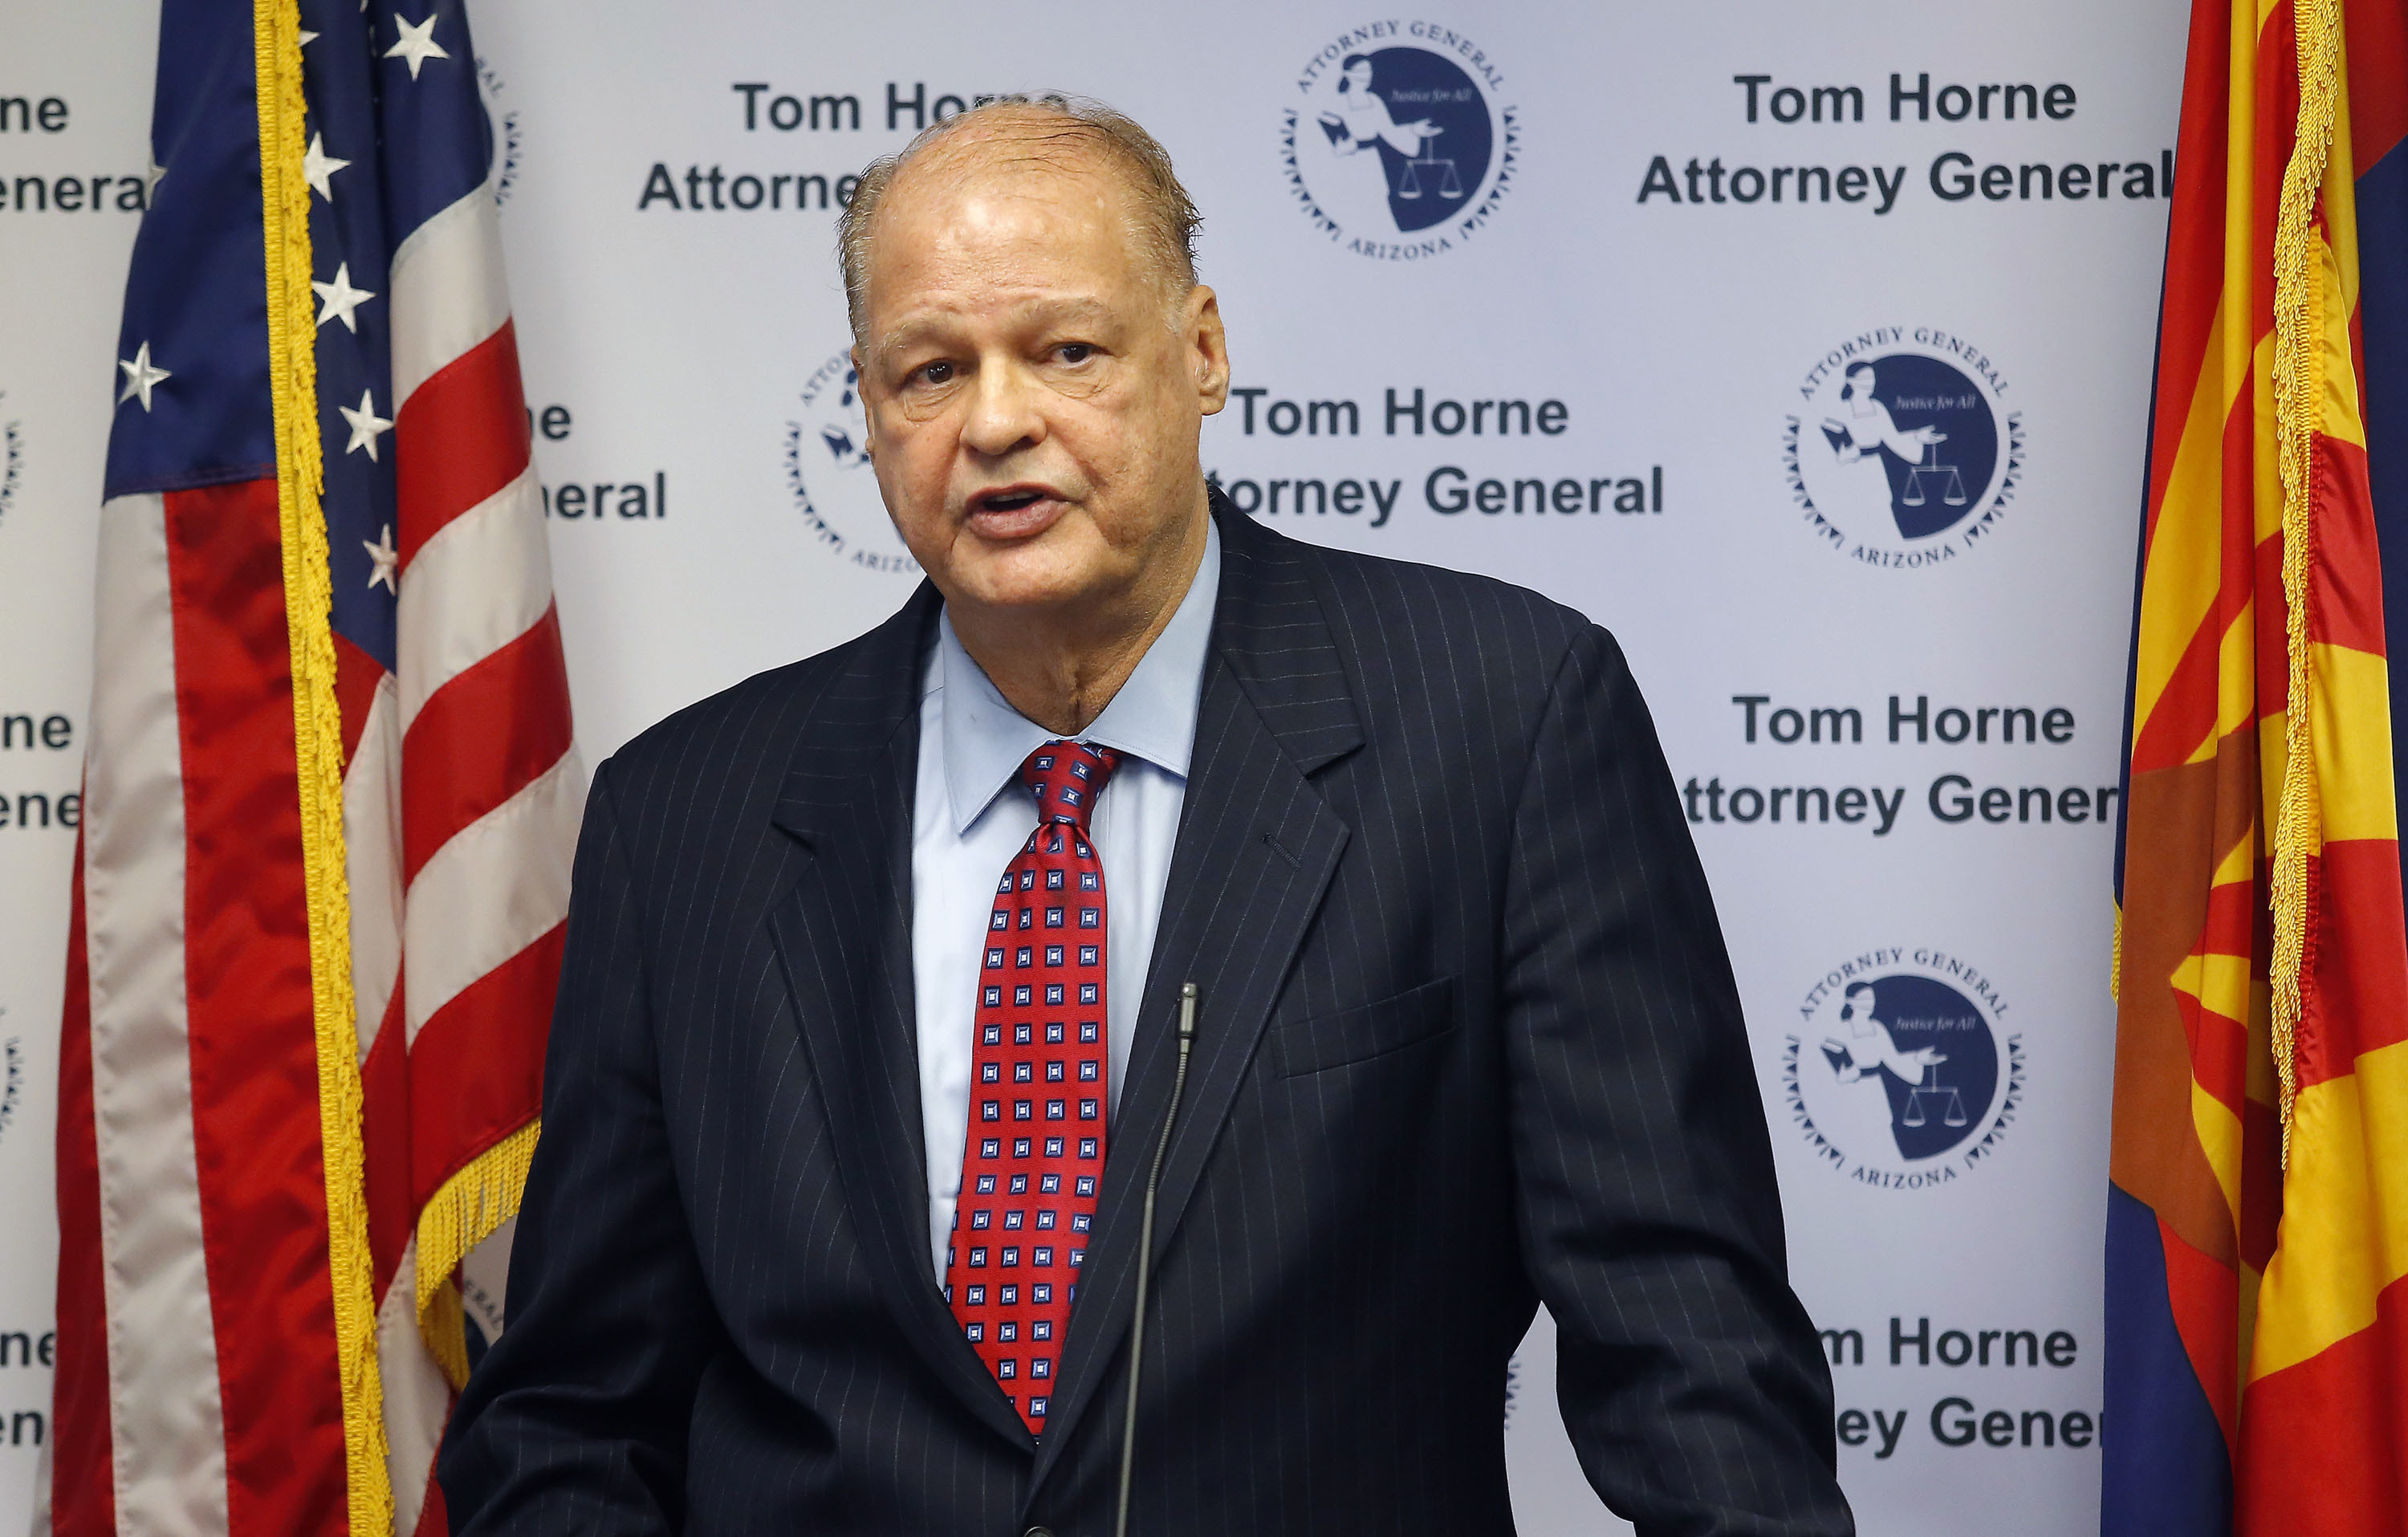 Tom Horne sues to stop dual language. So much for parental choice?